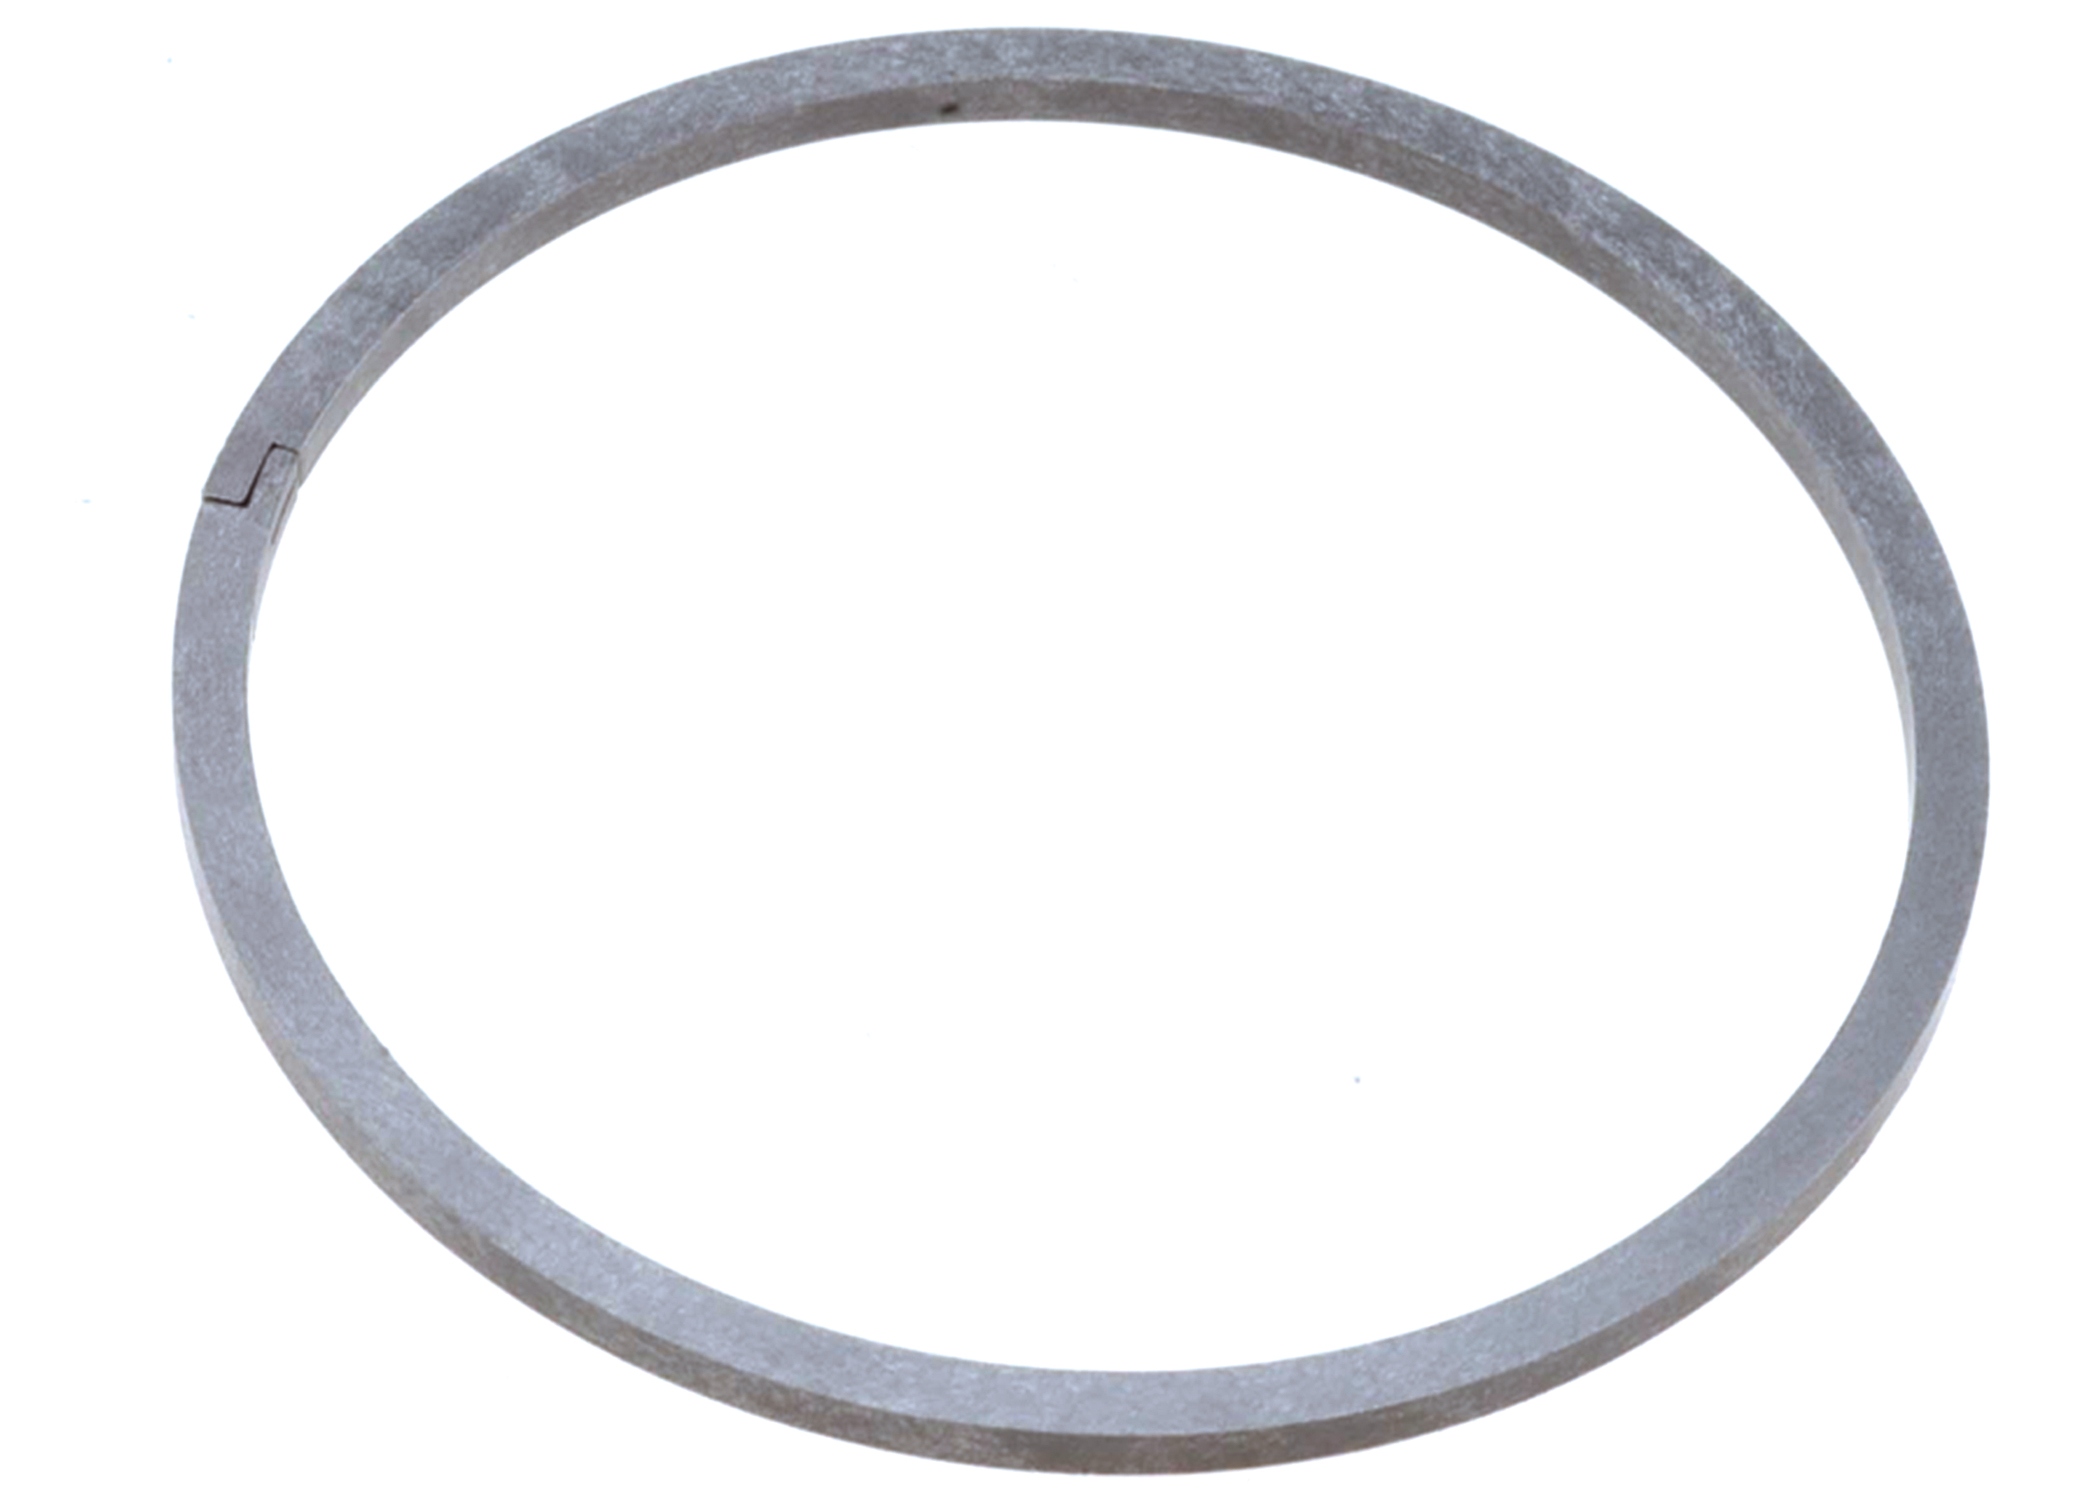 GM GENUINE PARTS - Automatic Transmission Clutch Housing Fluid Retaining Ring - GMP 24205833